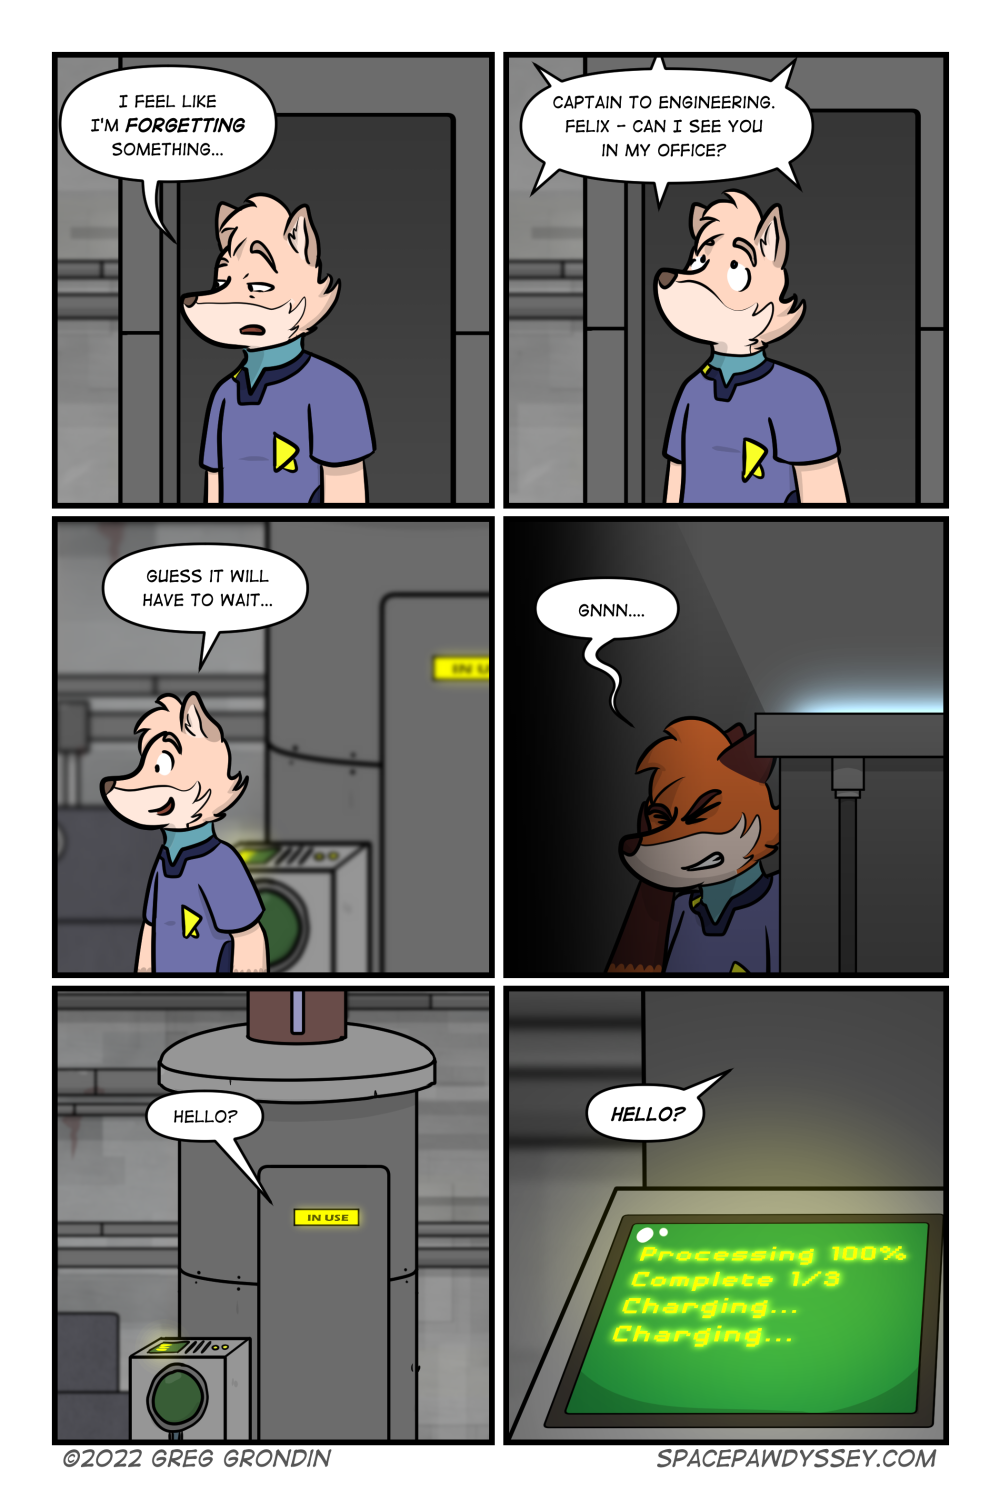 Space Pawdyssey #593